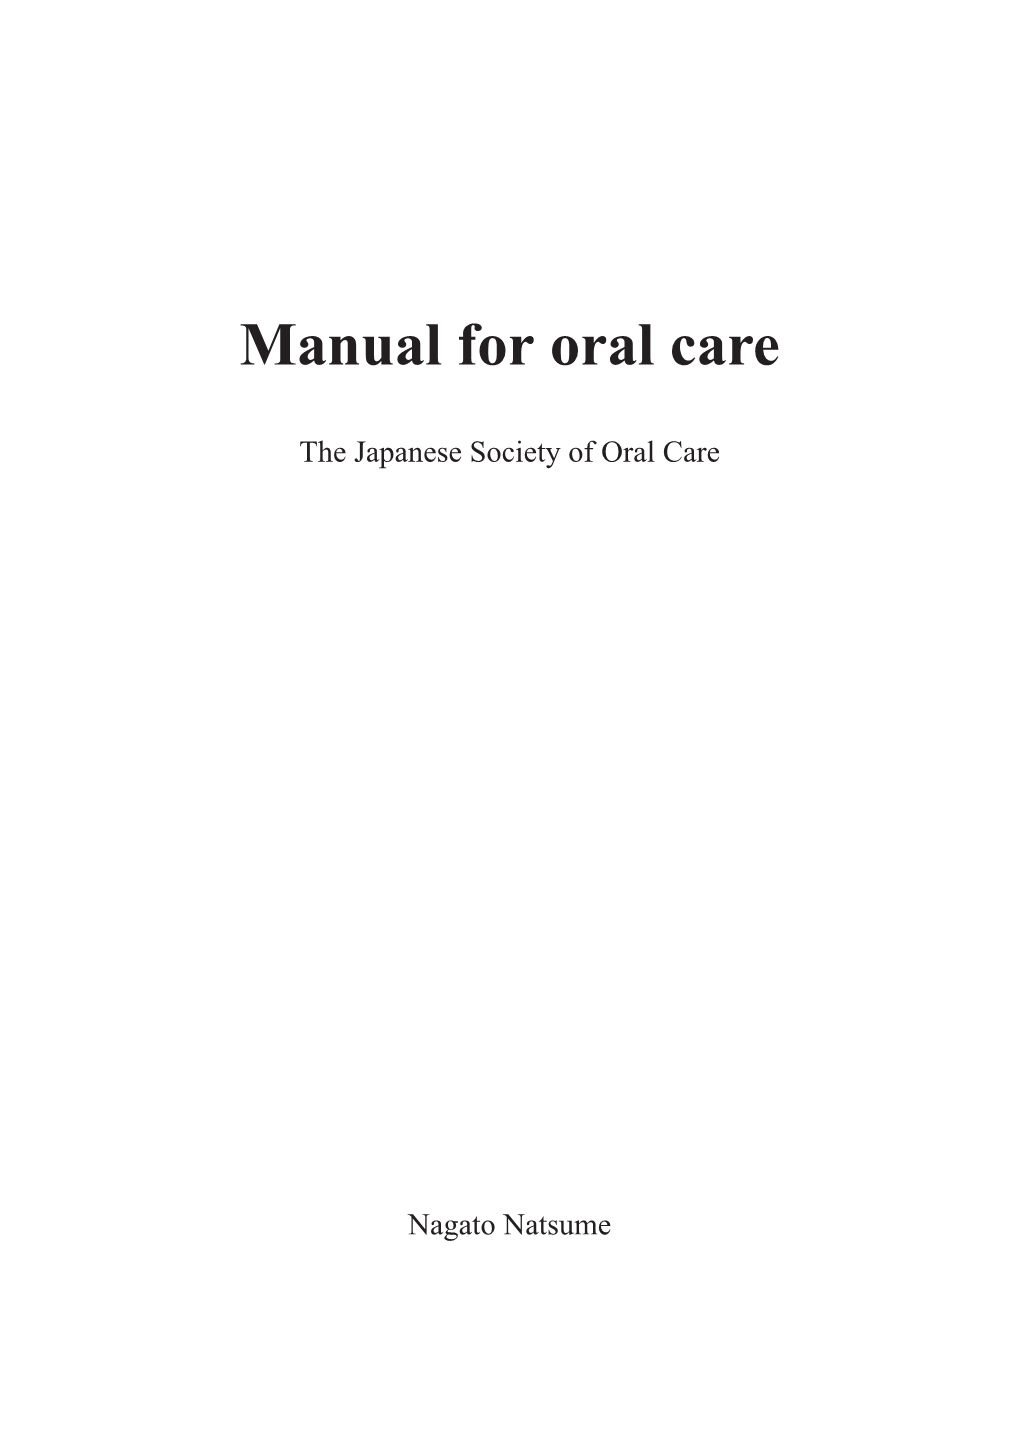 Manual for Oral Care